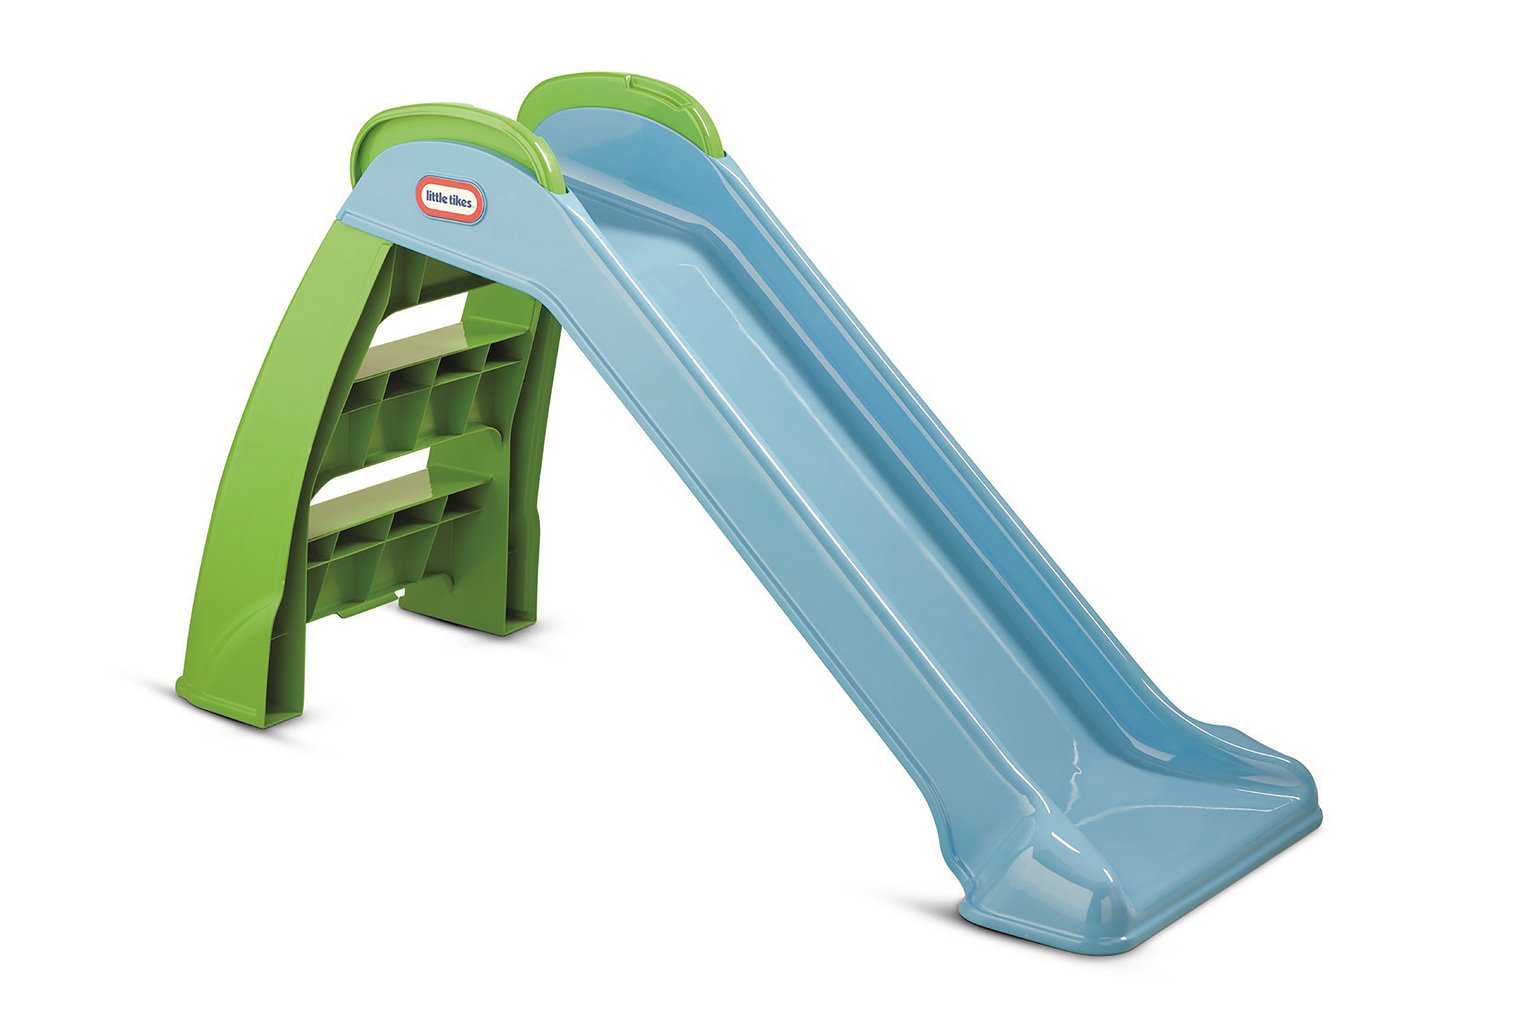 Little Tikes My First 3ft Toddler Slide - Blue and Green